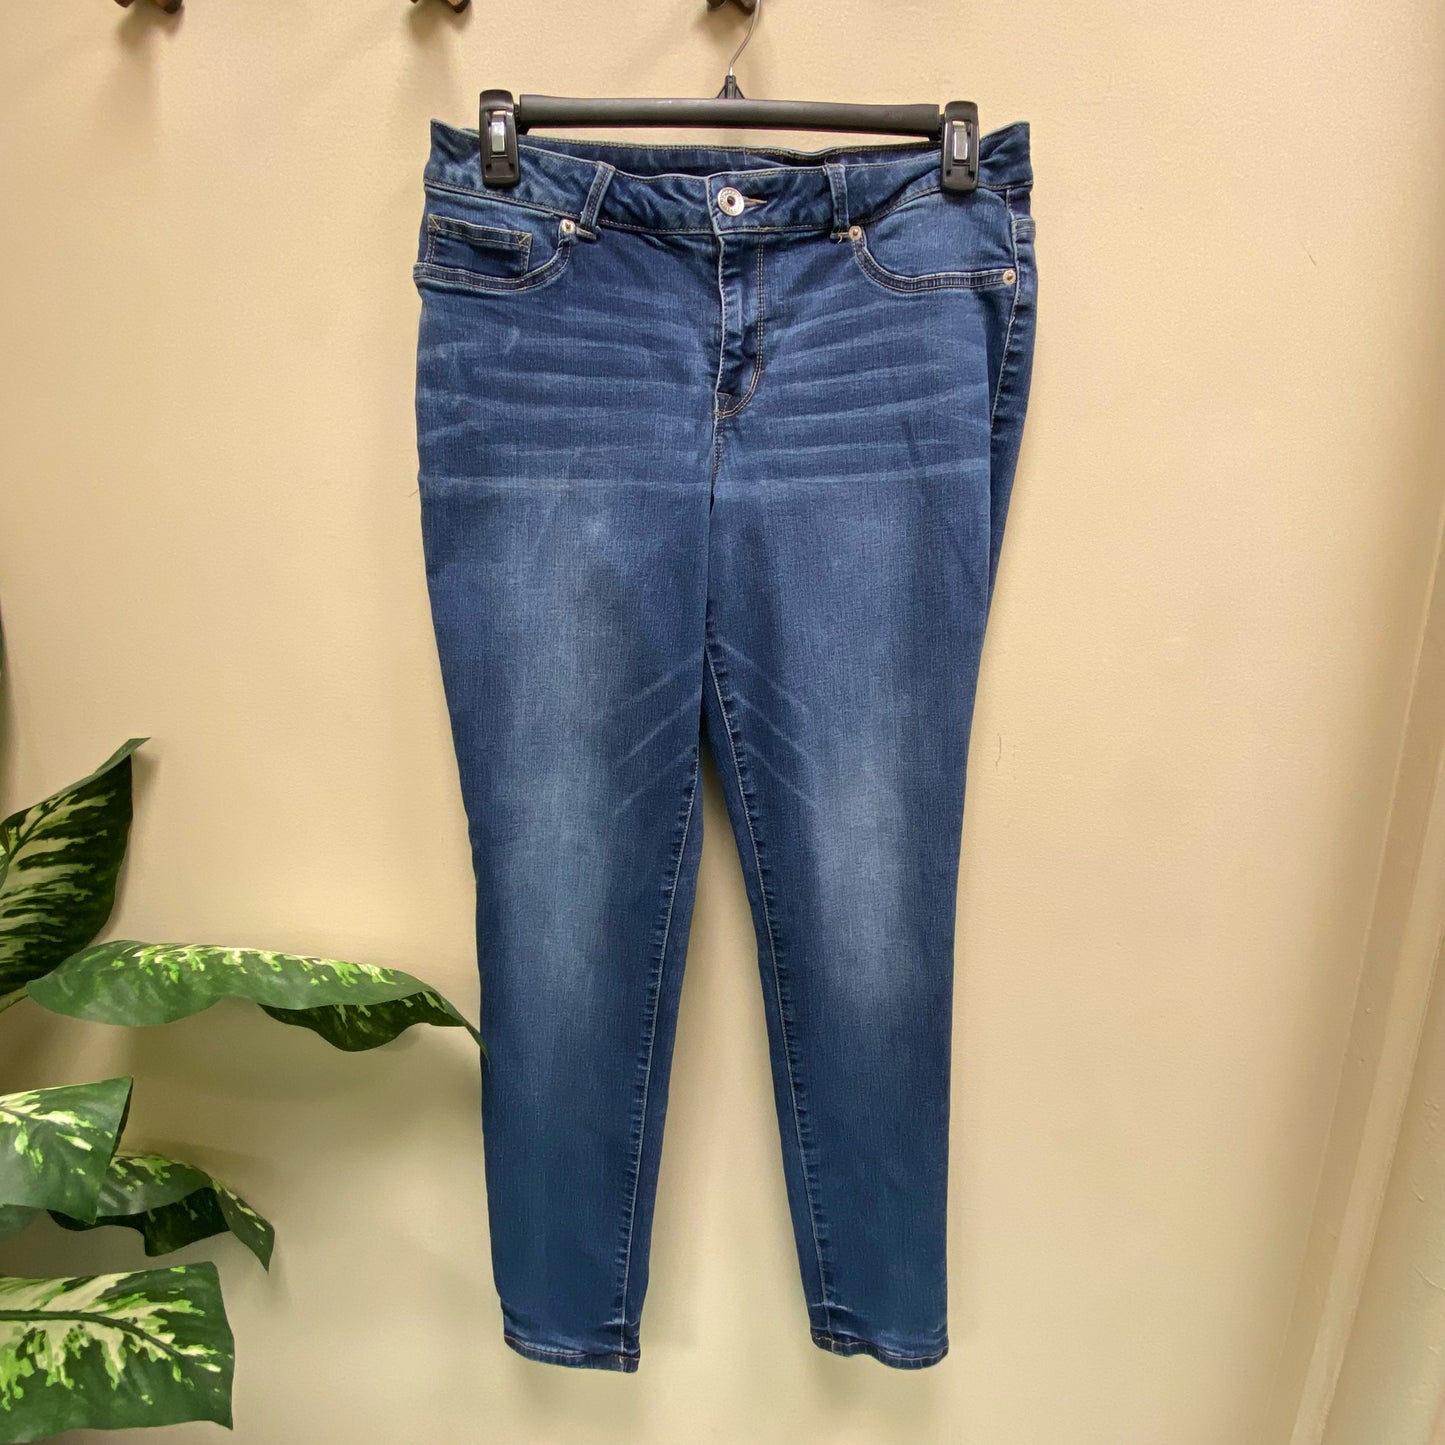 Maurices Jeggings - Size XL Regular